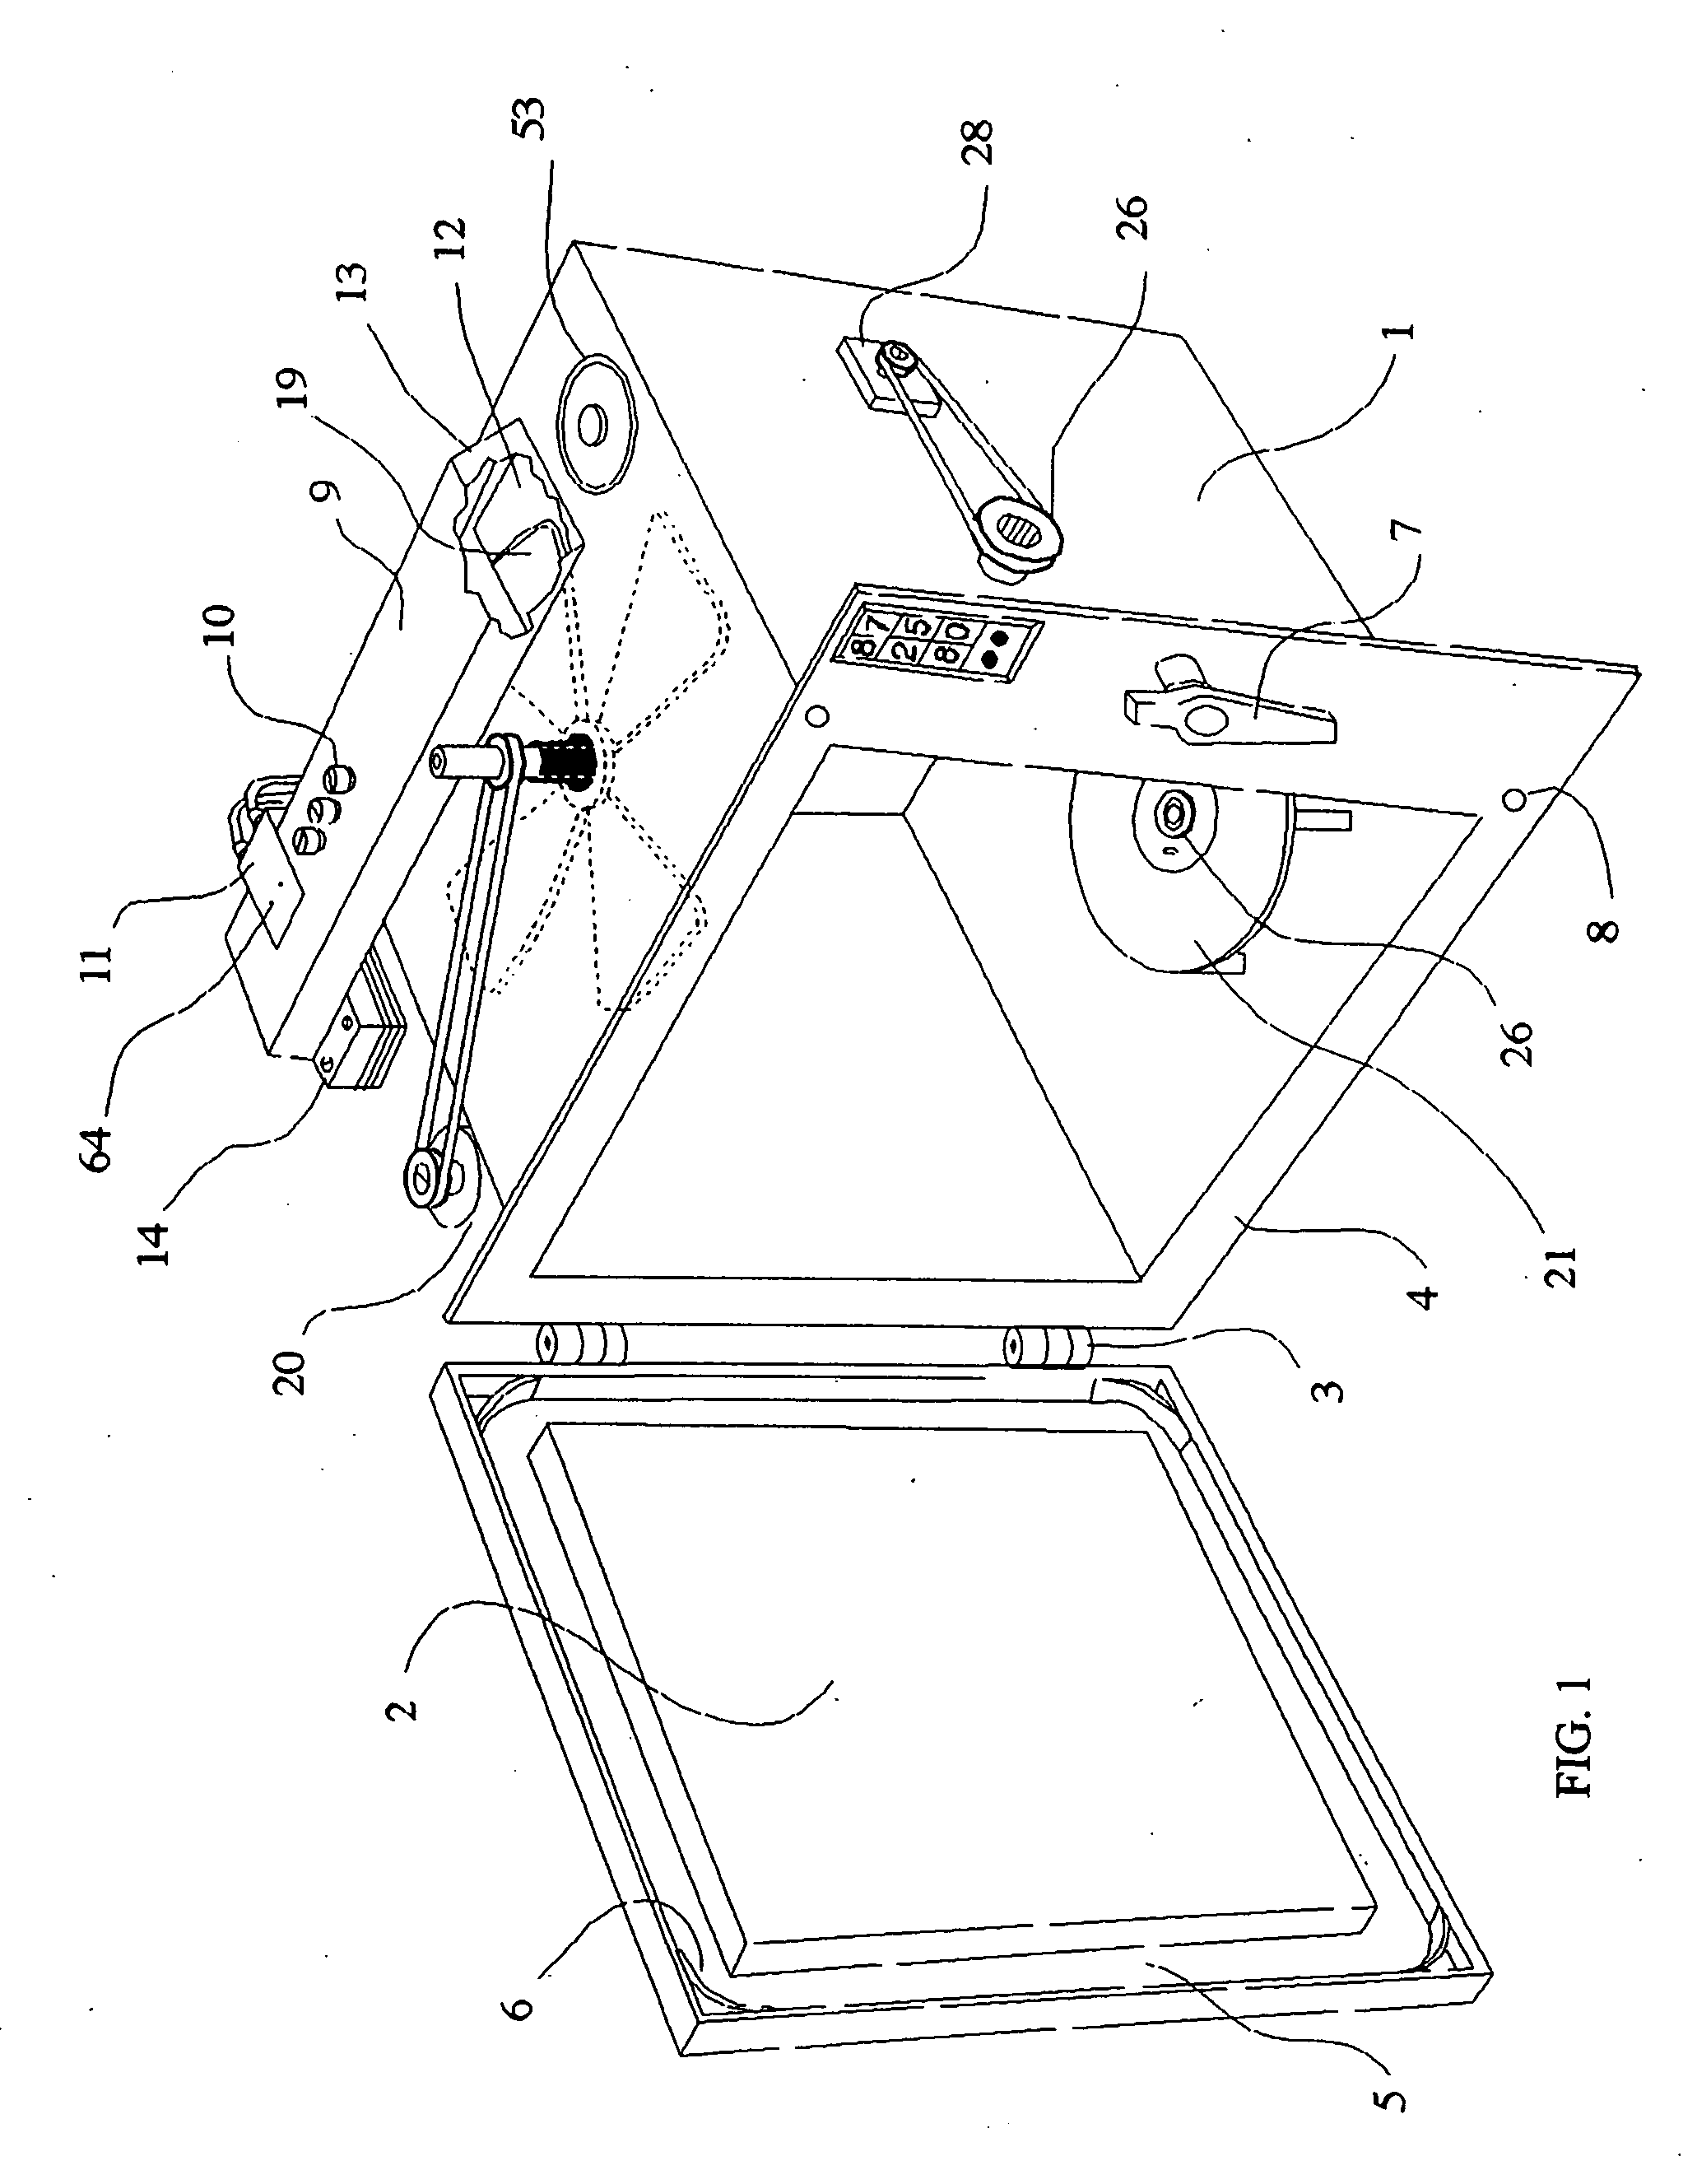 Hand-held microwave polymerization system for dentistry